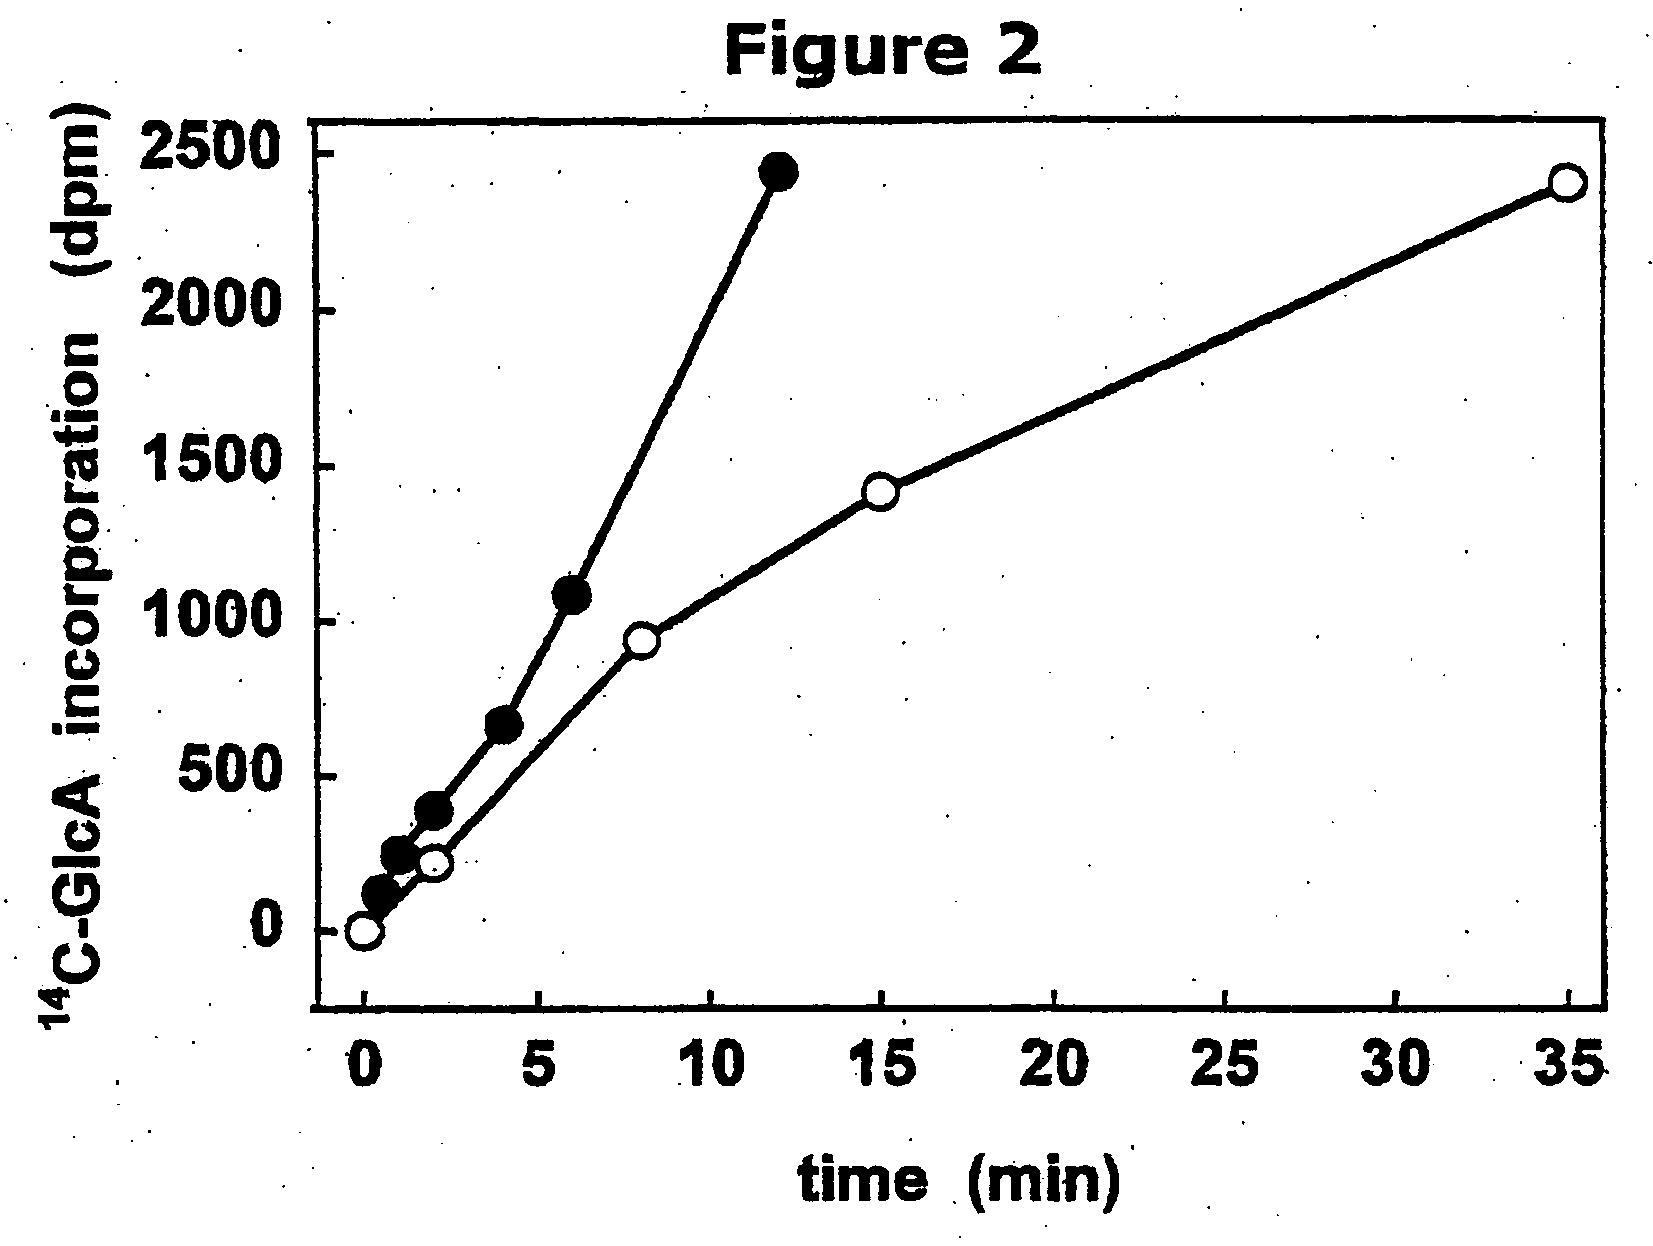 Natural, chimeric and hybrid glycosaminoglycan polymers and methods making and using same